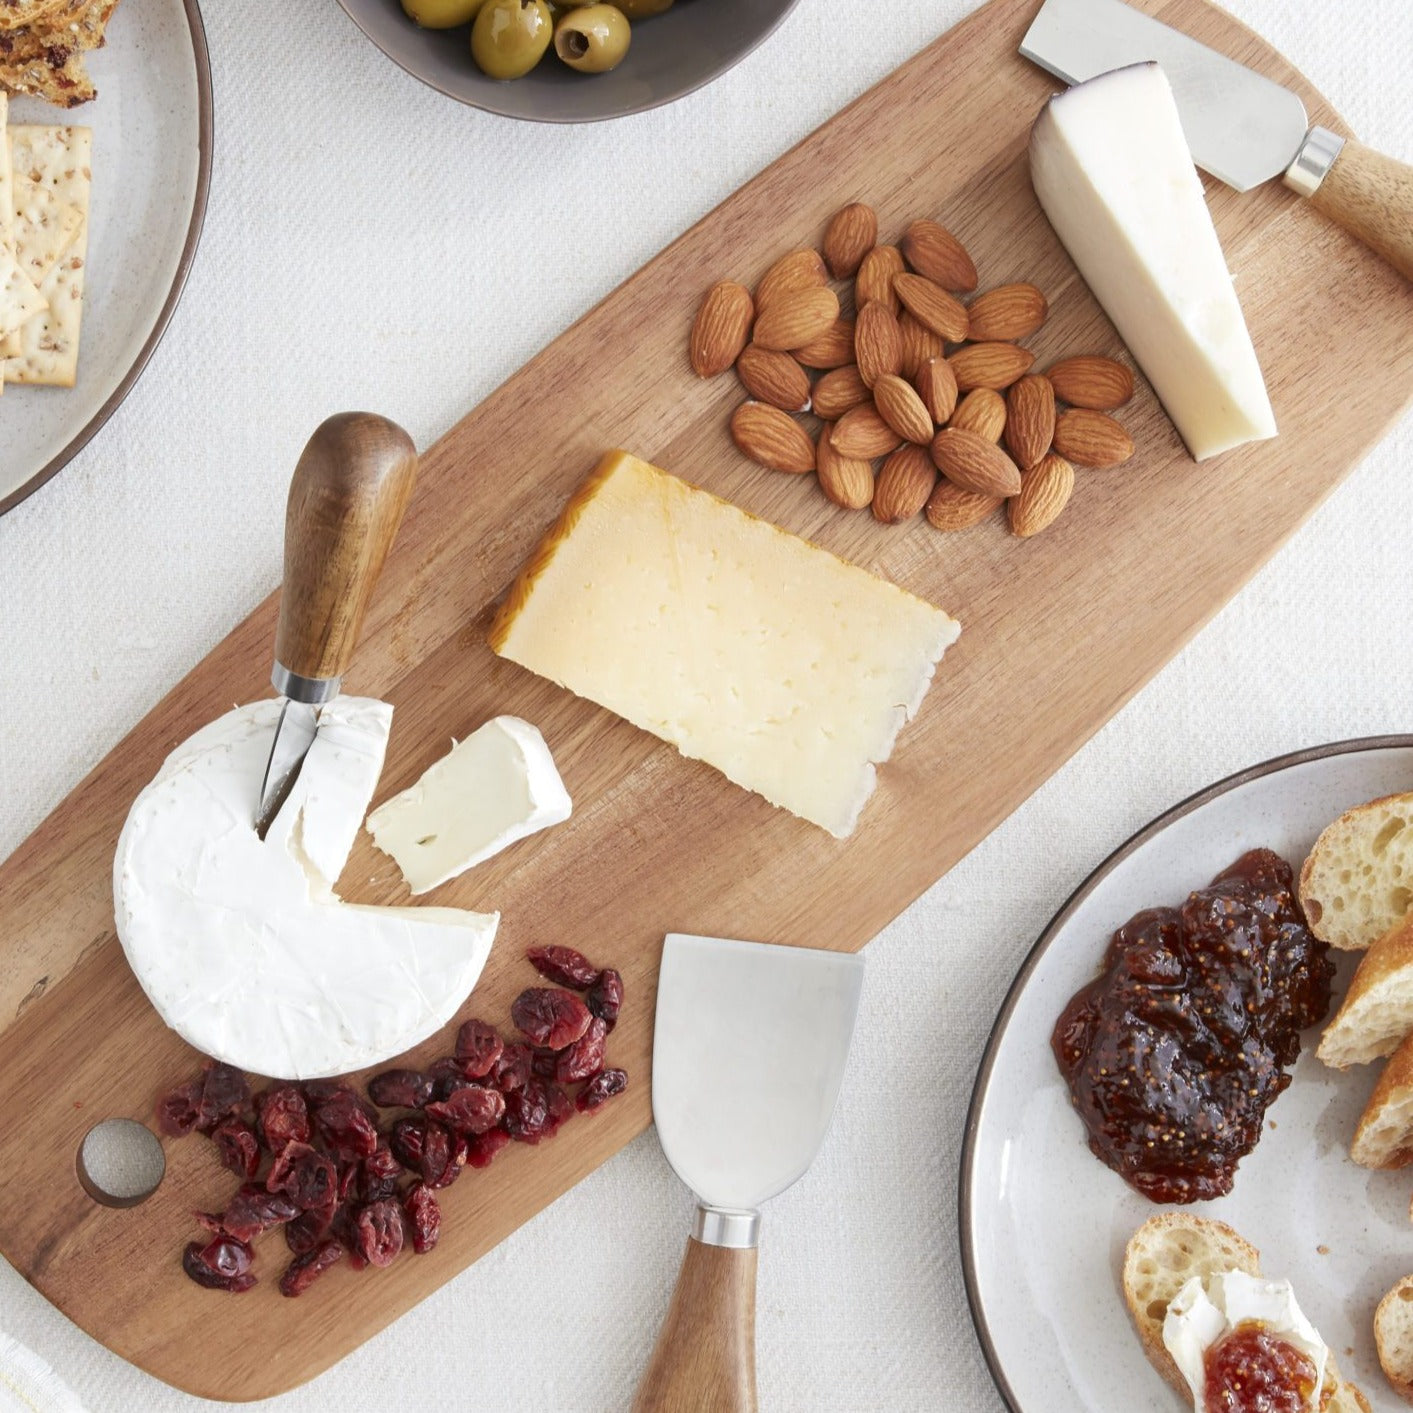 Lifestyle photo, acacia cheese board with tapas preparation ingredients including dried cranberries, three types of cheese, and almonds.